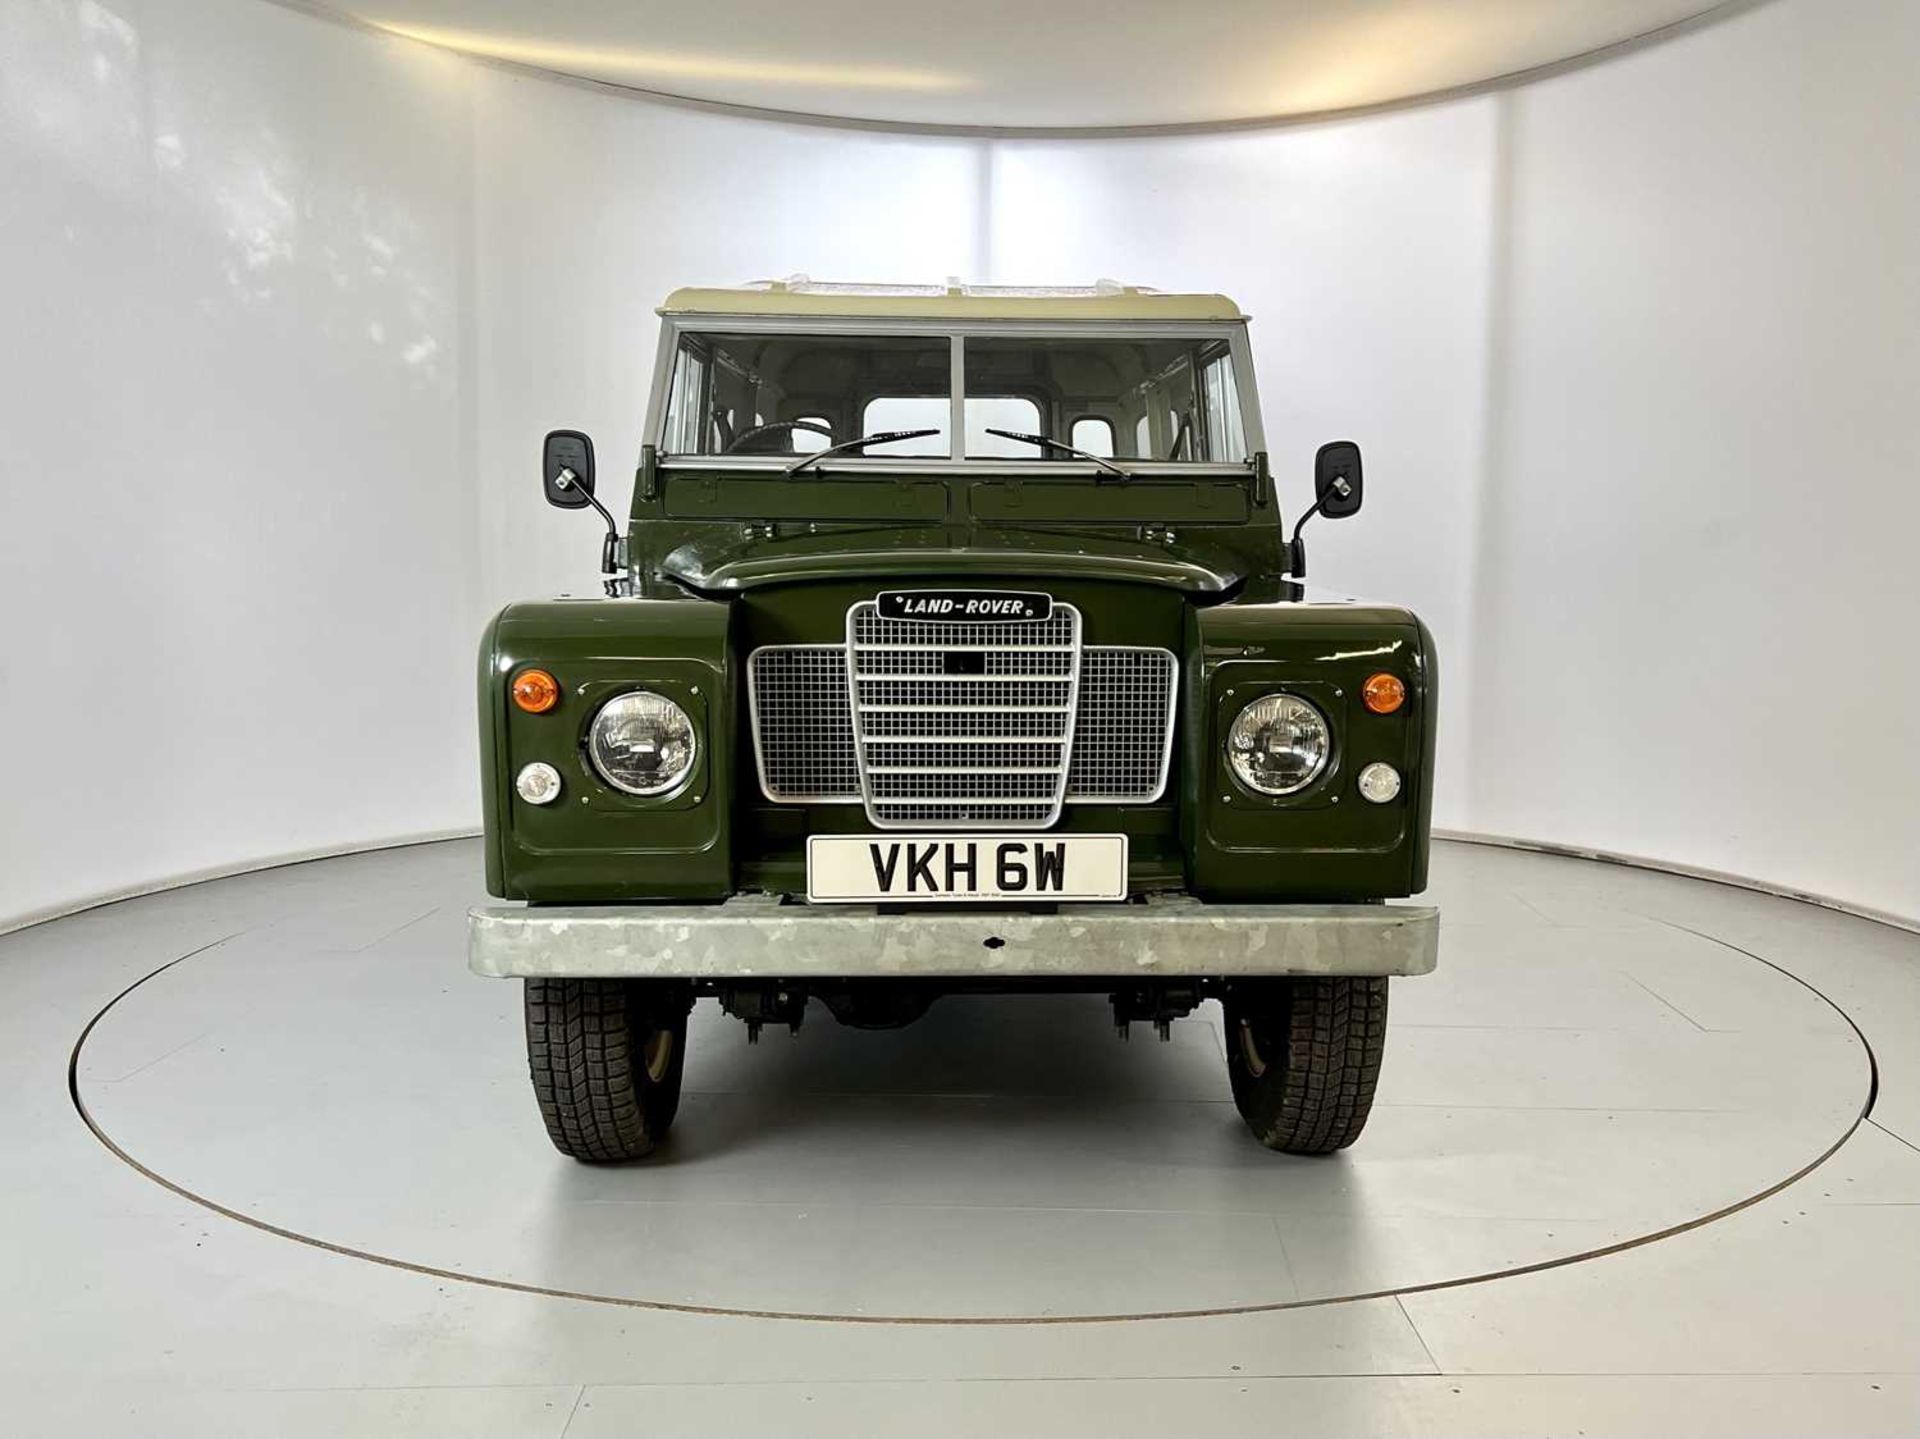 1981 Land Rover Series 3 - 6 Cylinder - Image 2 of 31